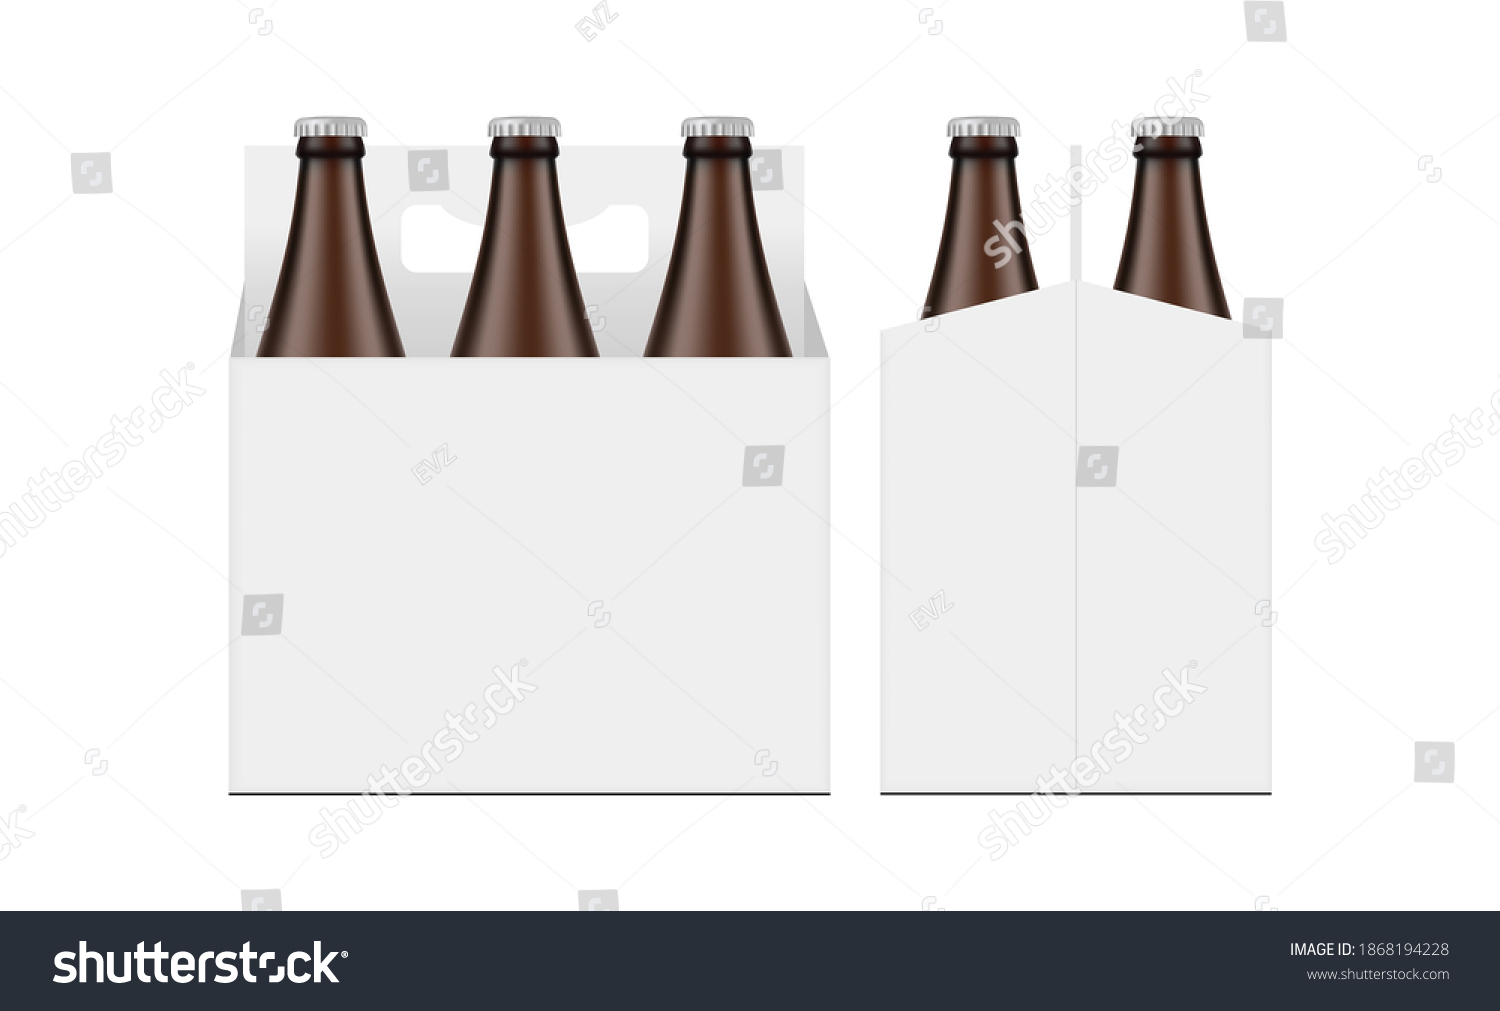 SVG of Cardboard Beer Bottle Carrier Packaging Box Mockup, Front and Side View, Isolated on White Background. Vector Illustration svg